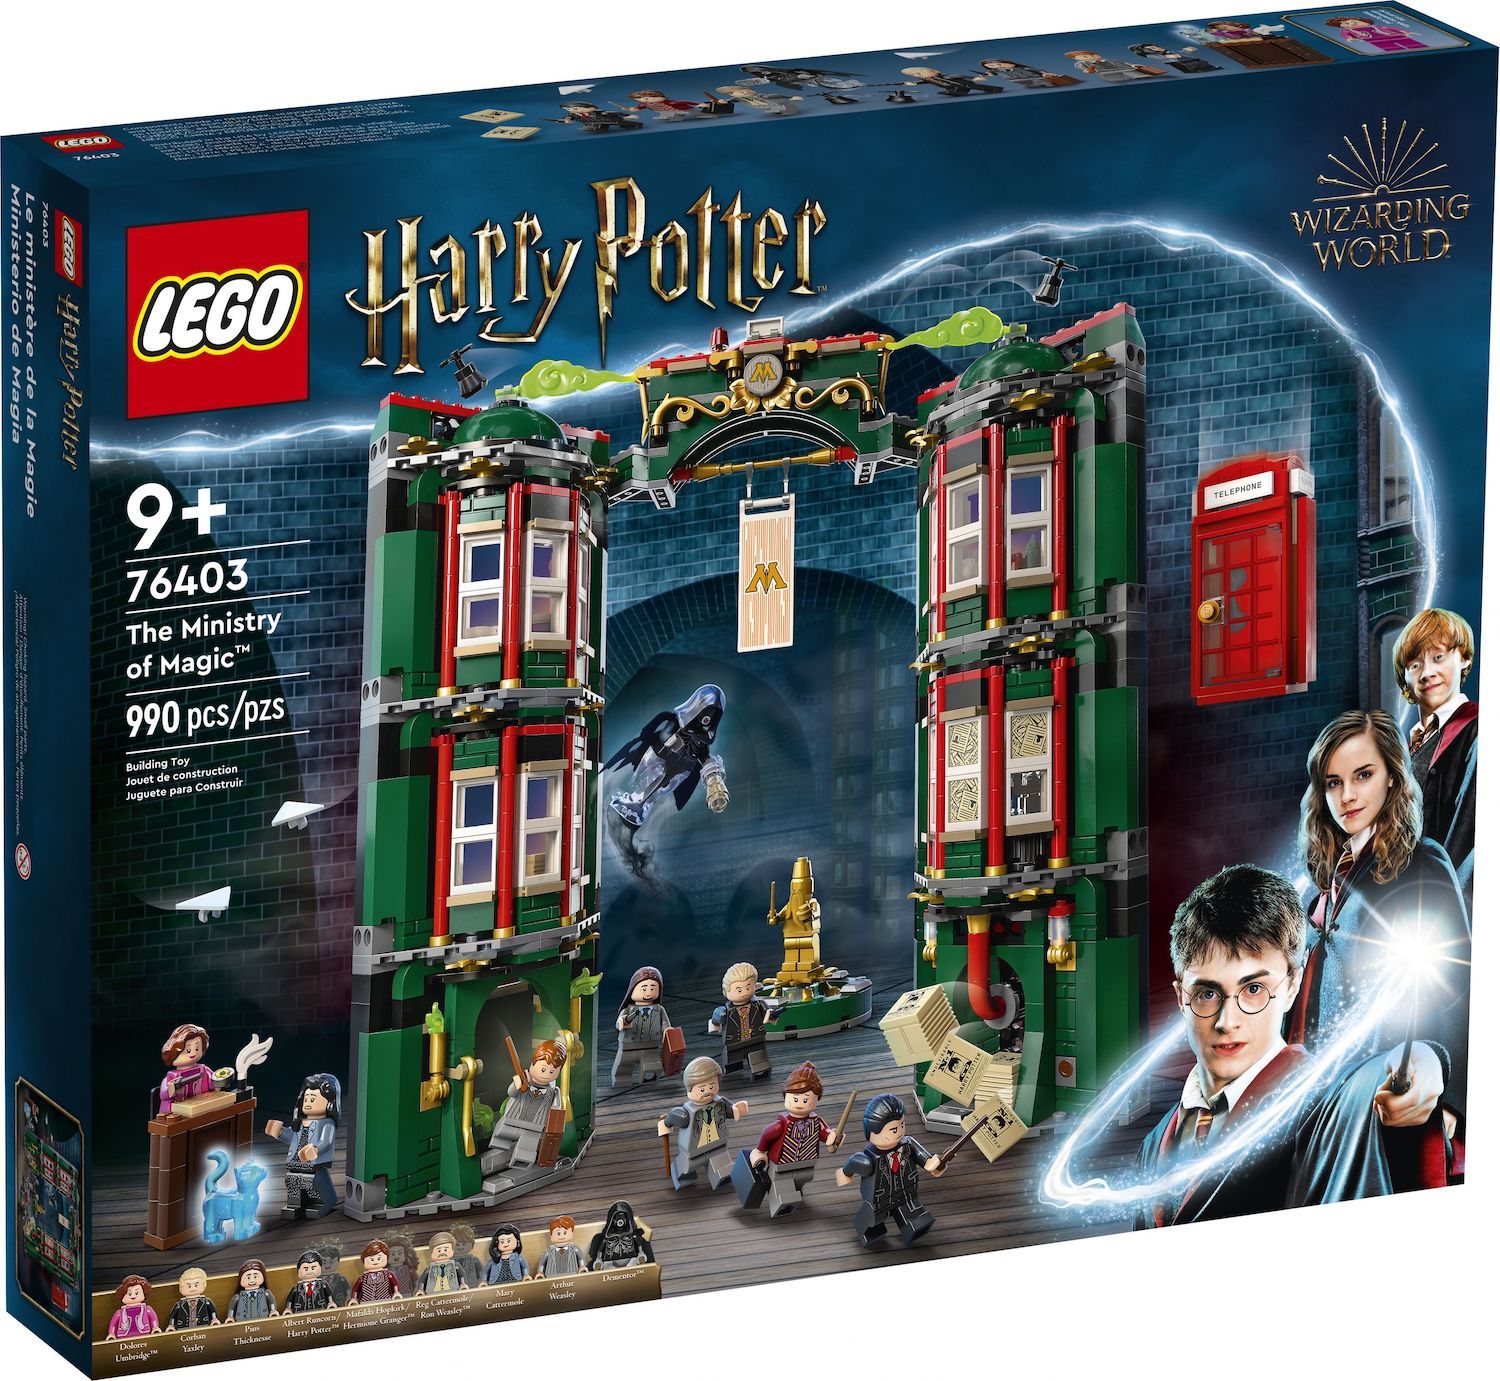 Six New LEGO Harry Potter Sets Coming Out Next Month